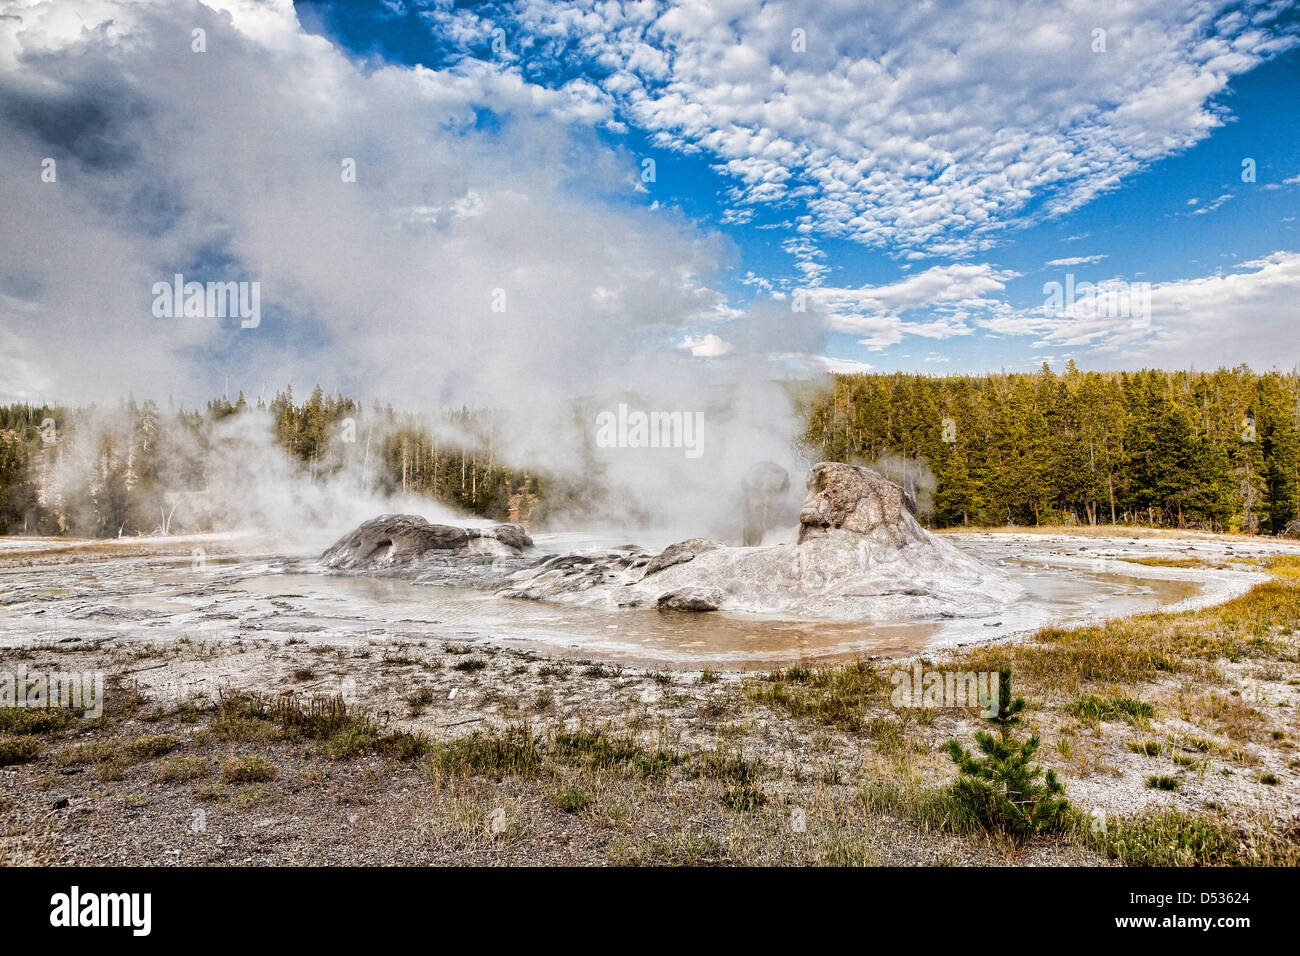 geysers in yellowstone national park, wyoming us Stock Photo